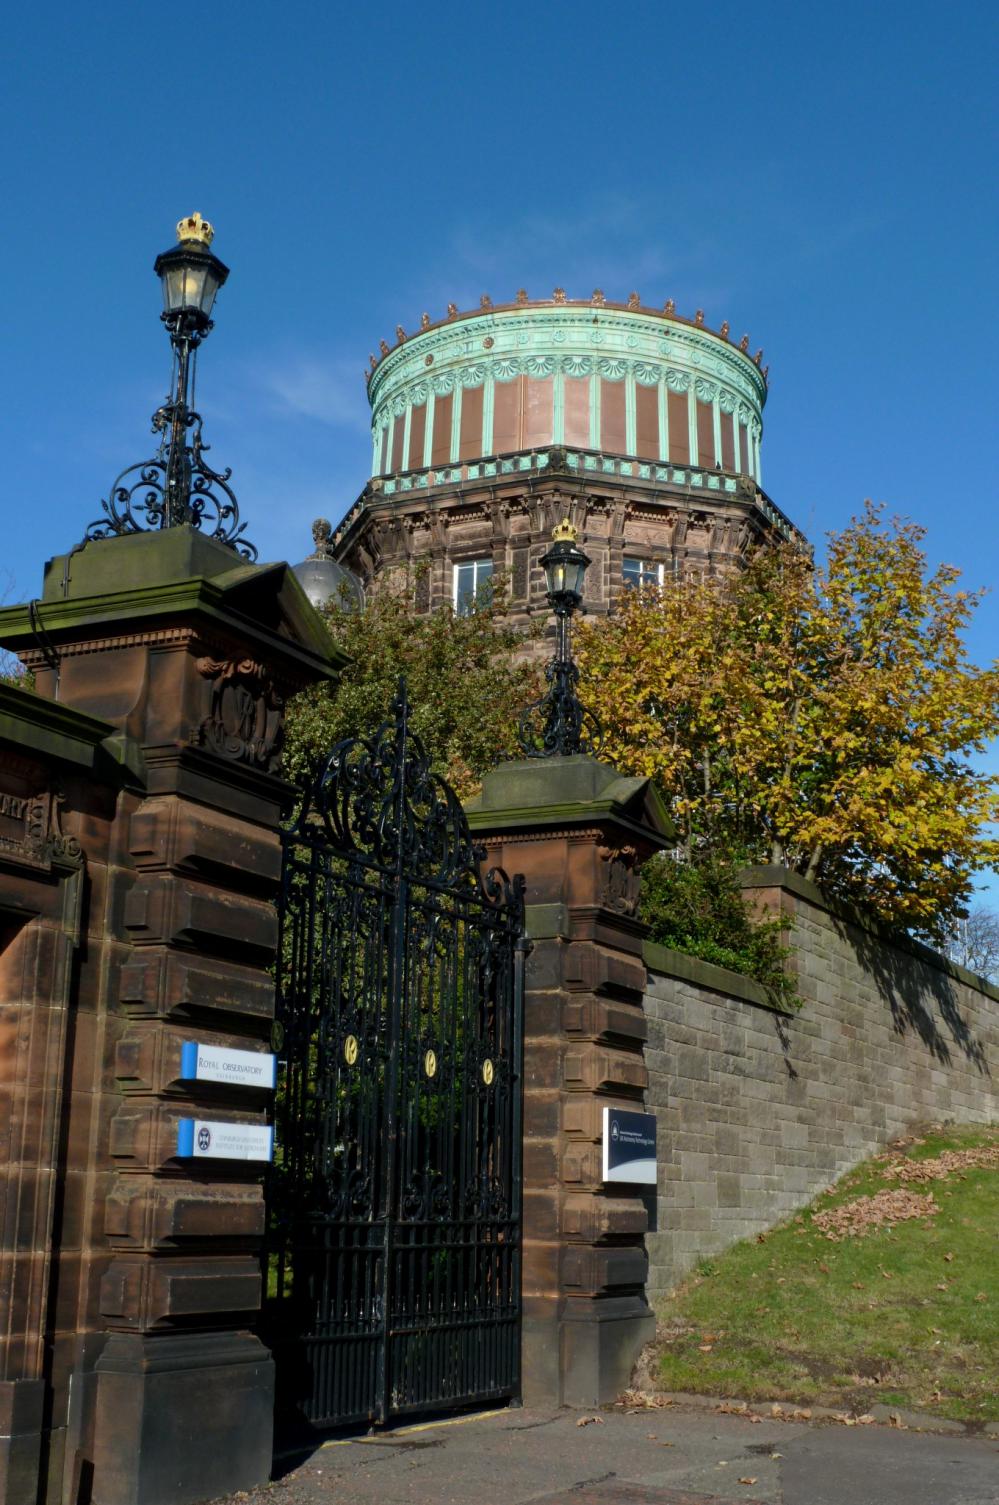 Royal Observatory Edinburgh, East Tower with coppe